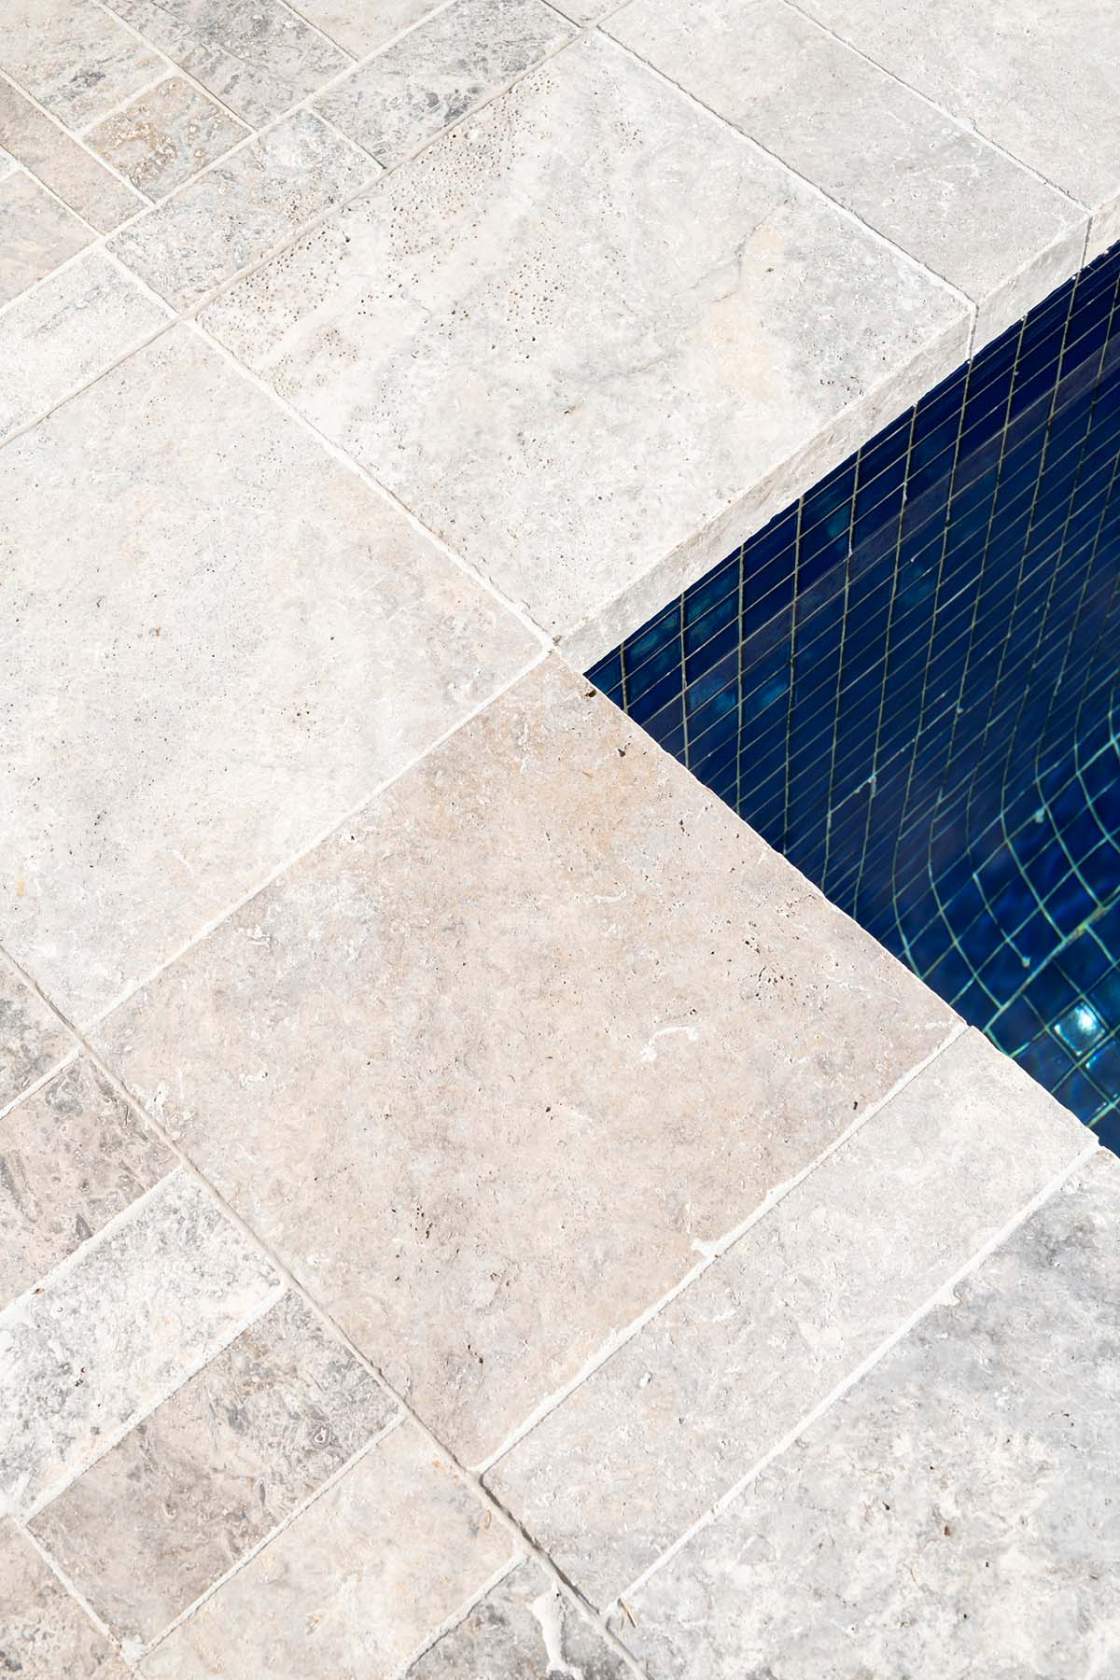 Silver Travertine pool coping with surrounds tiled in Silver Travertine cobbles